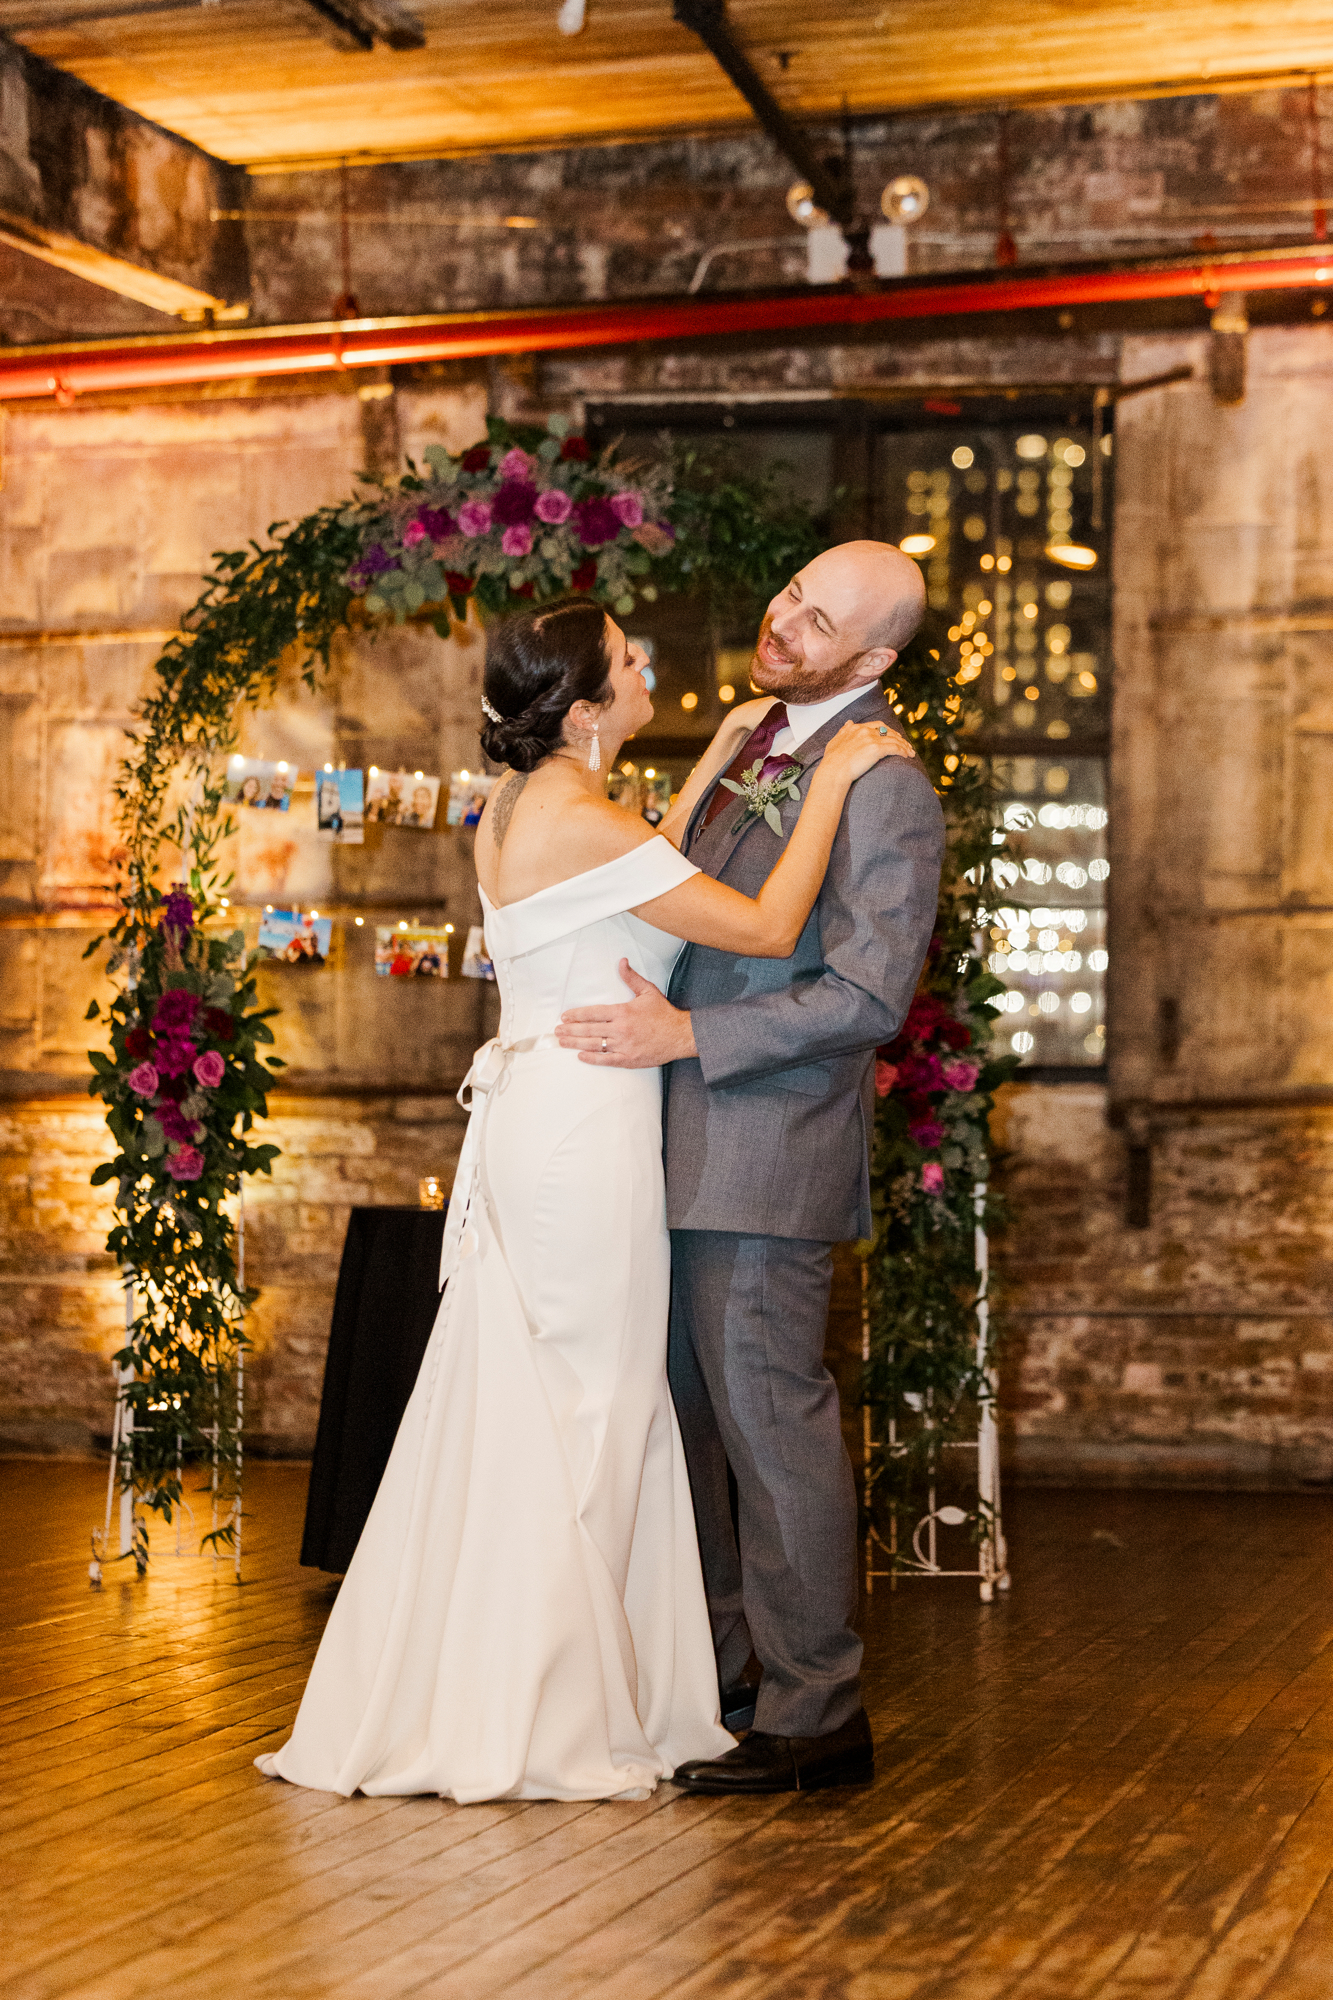 Intimate Wedding Photos at Greenpoint Loft in Brooklyn